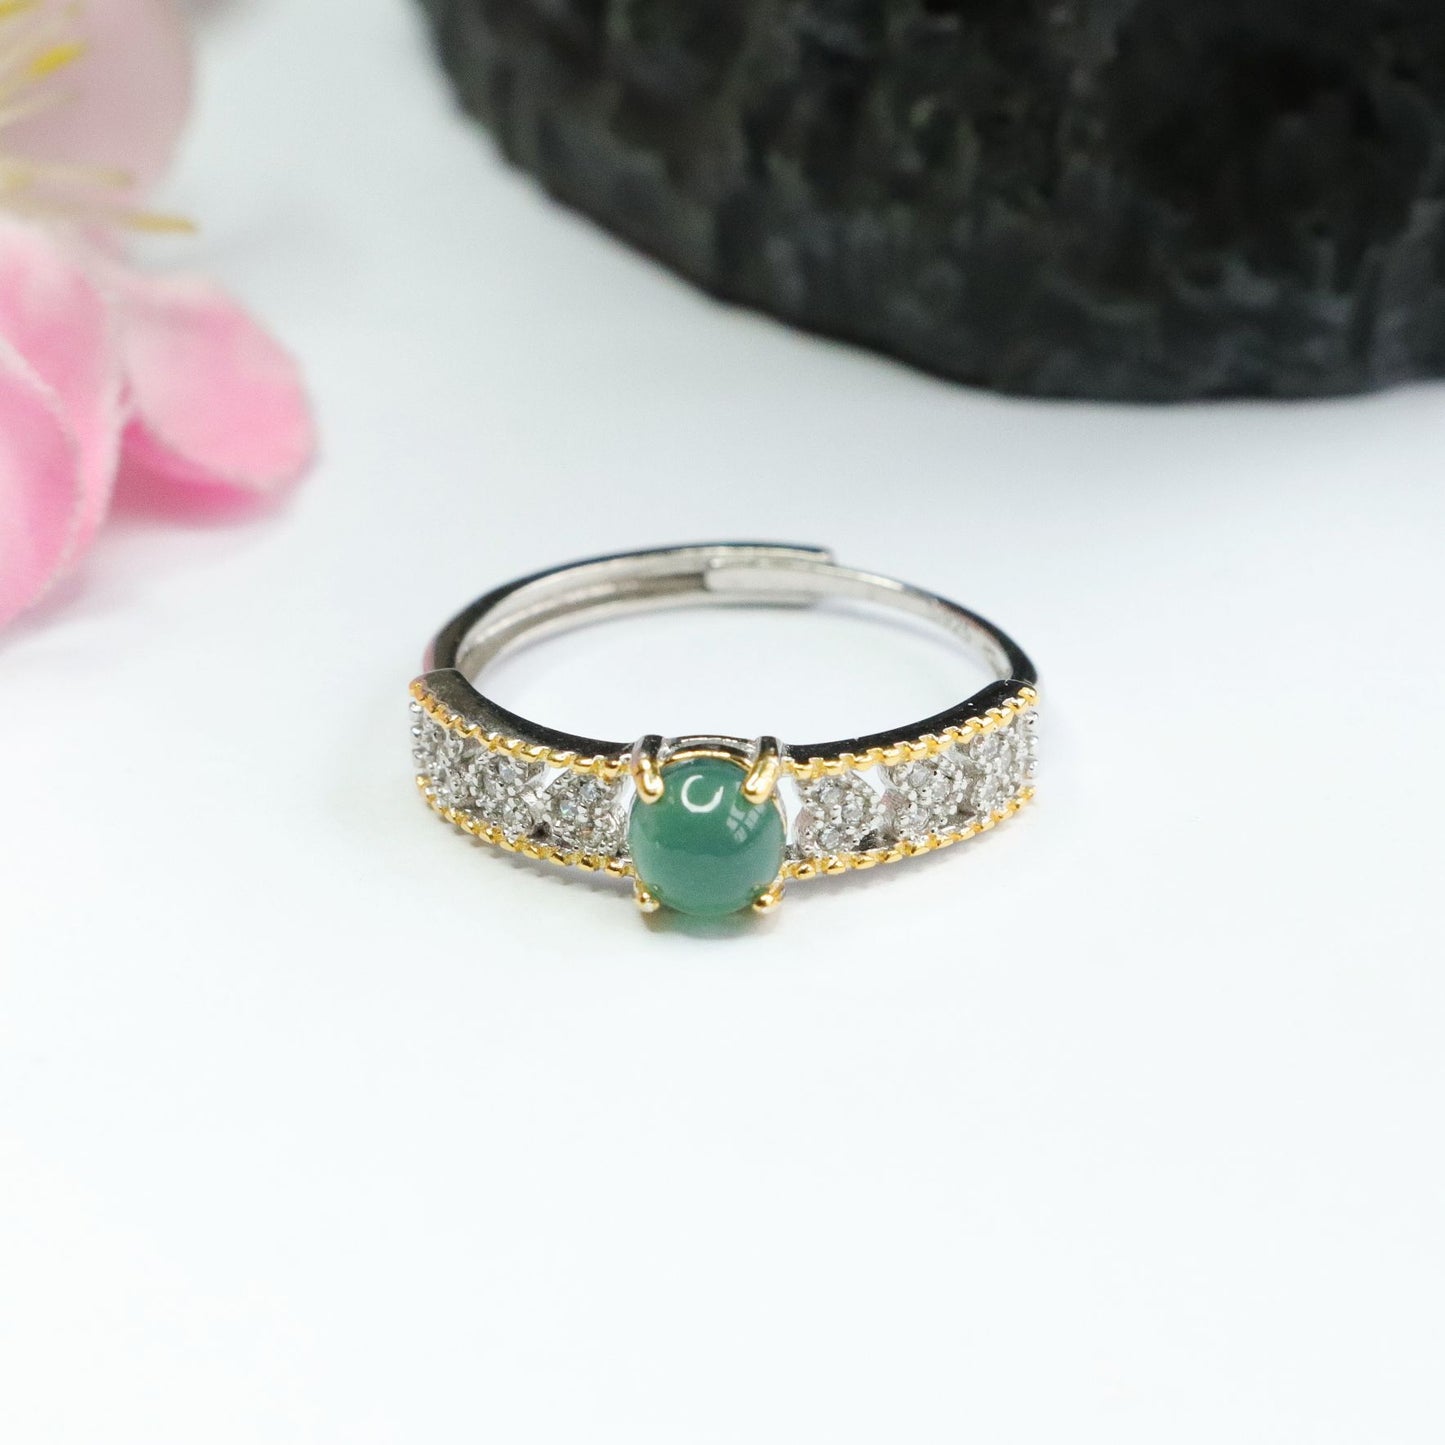 Golden Hollow Love Ring with Natural Jade and Sterling Silver